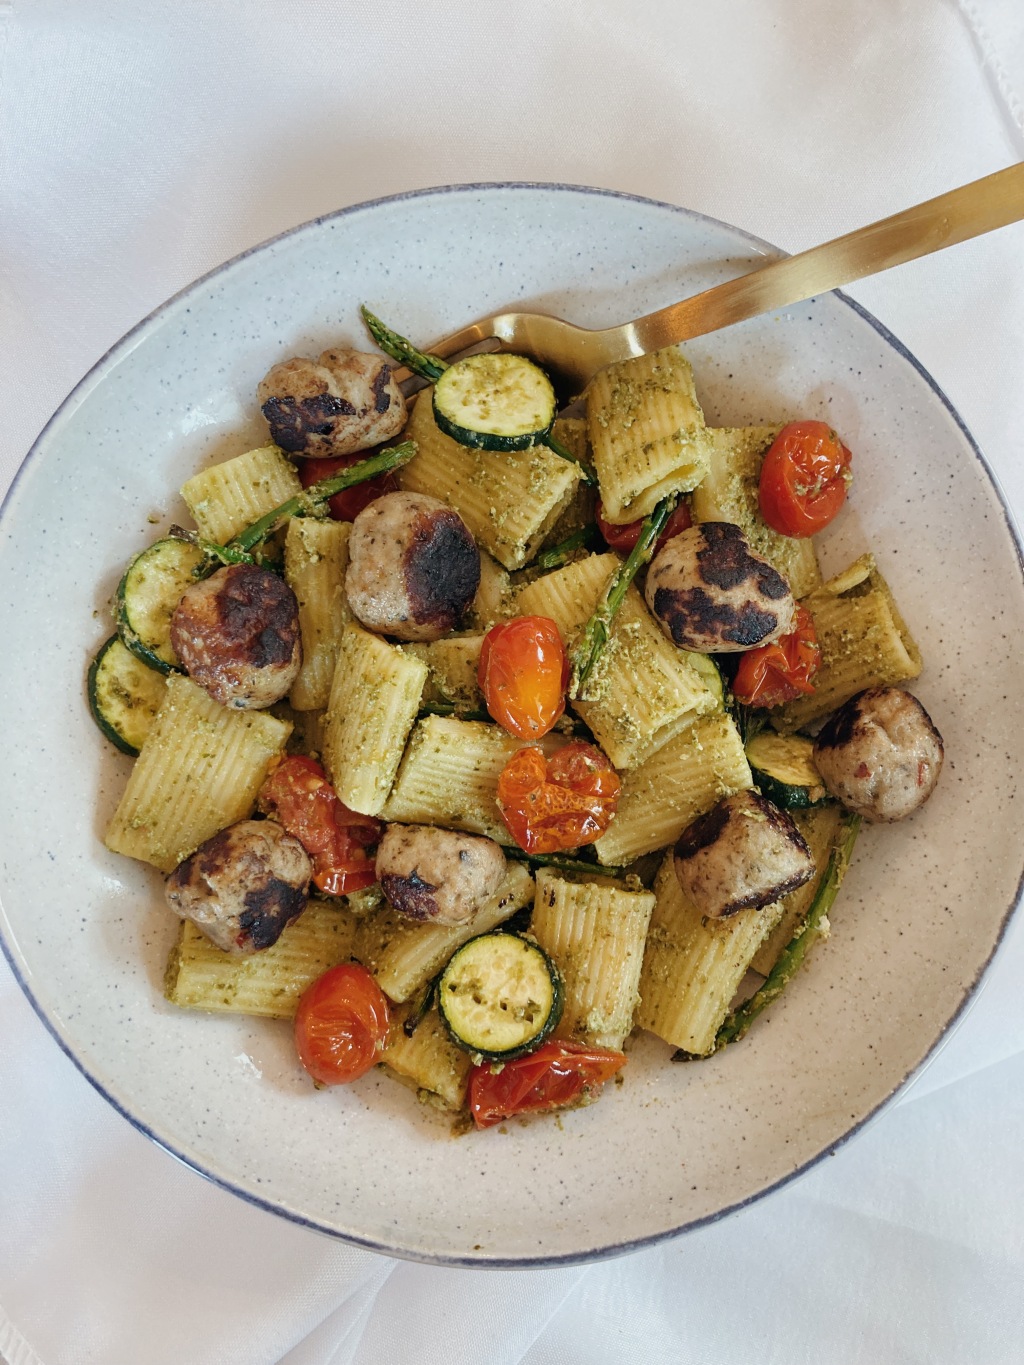 Pesto Ricotta Pasta with Roasted Vegetables and Chicken Meatballs